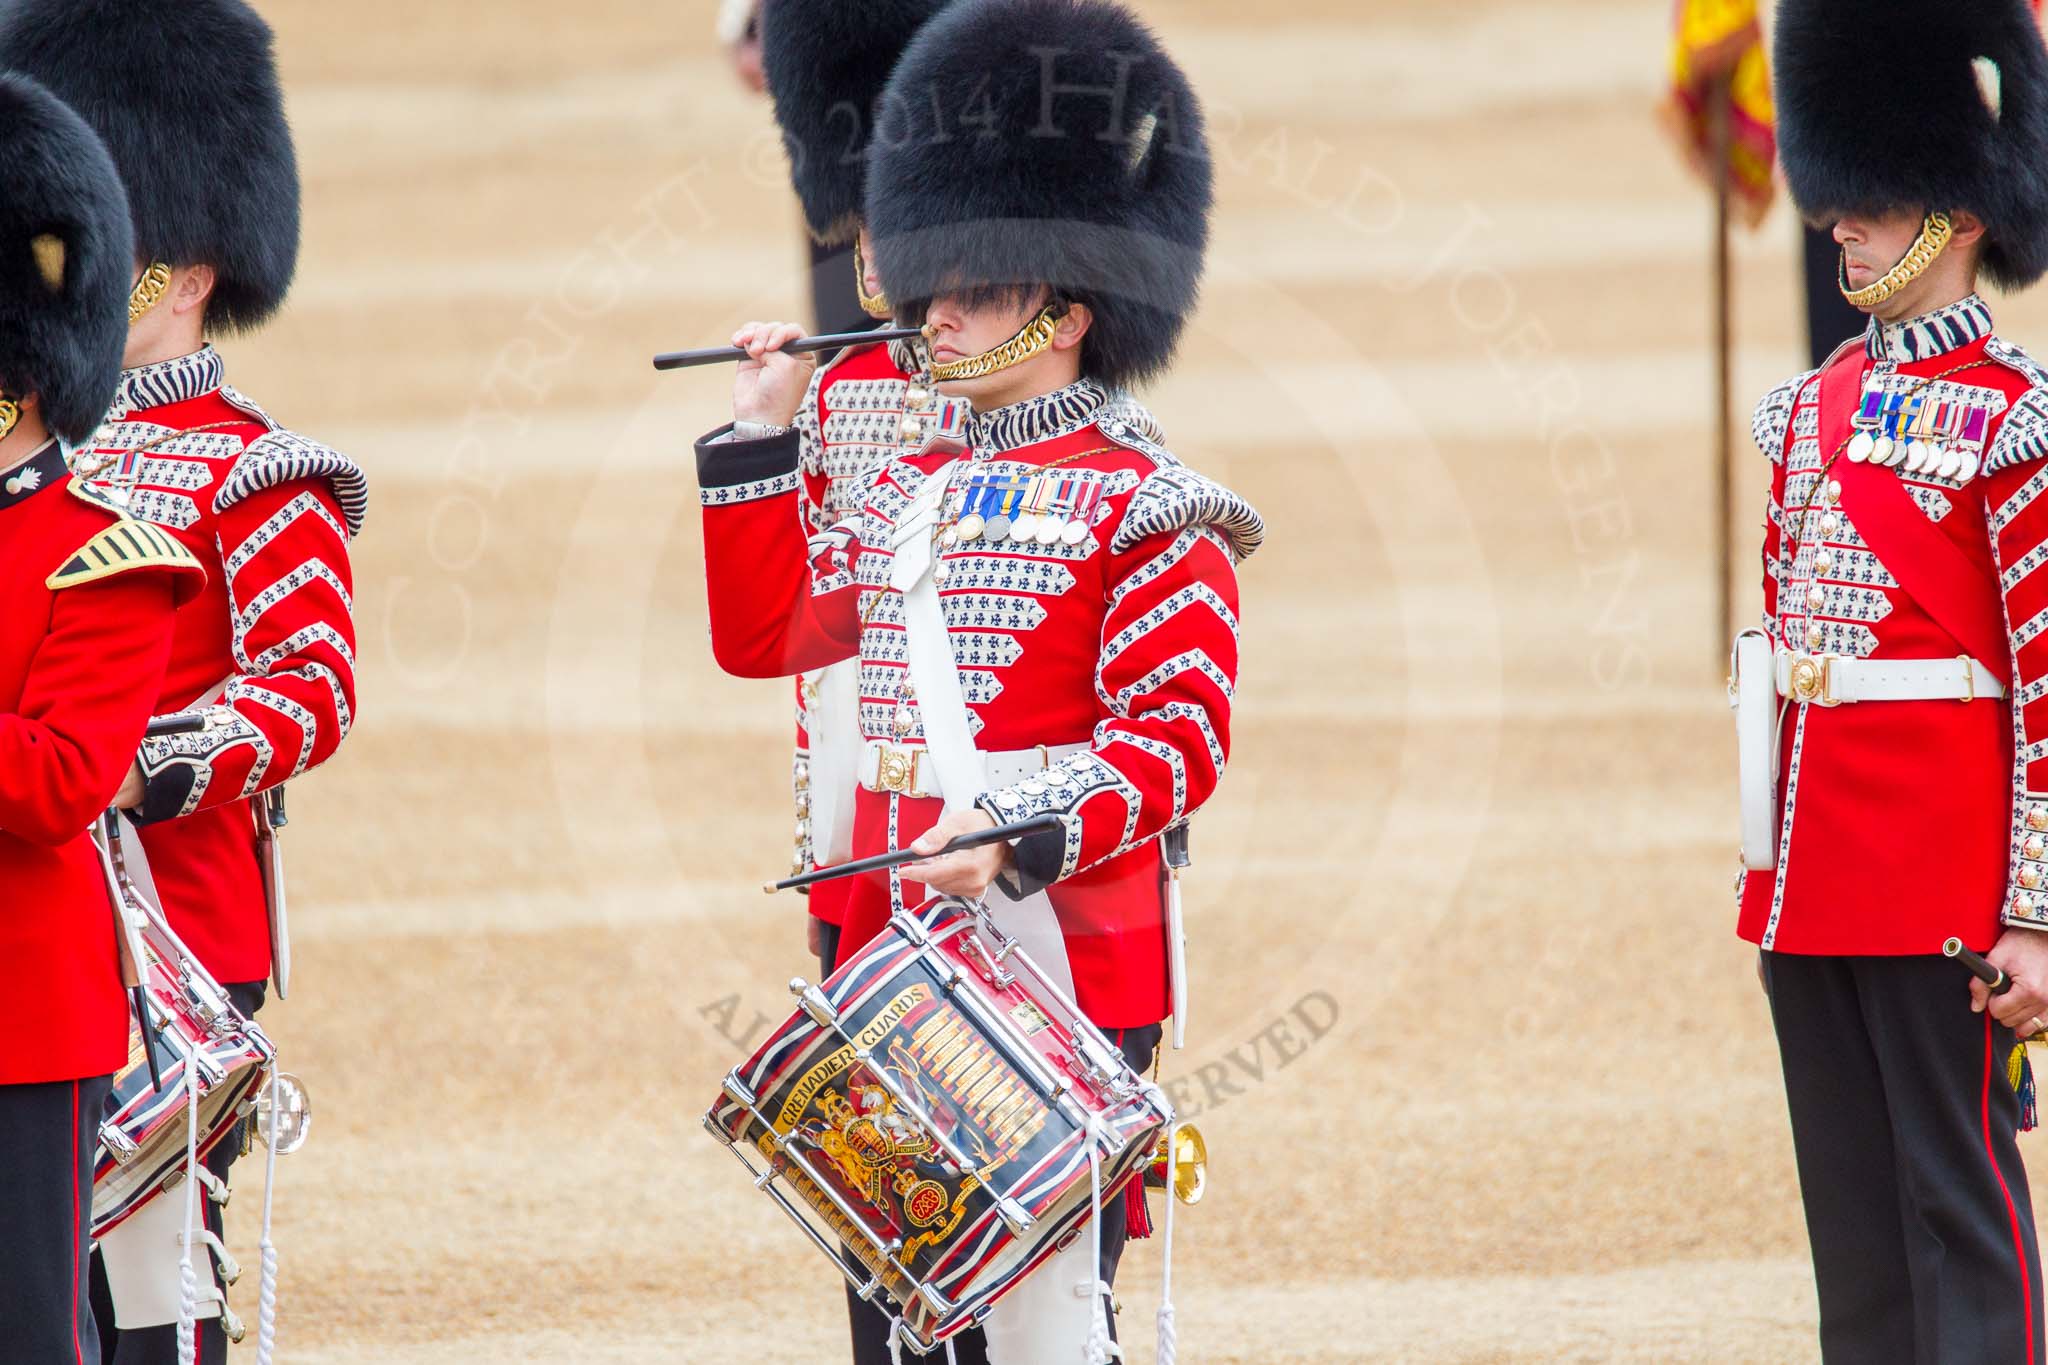 Trooping the Colour 2014.
Horse Guards Parade, Westminster,
London SW1A,

United Kingdom,
on 14 June 2014 at 11:12, image #461